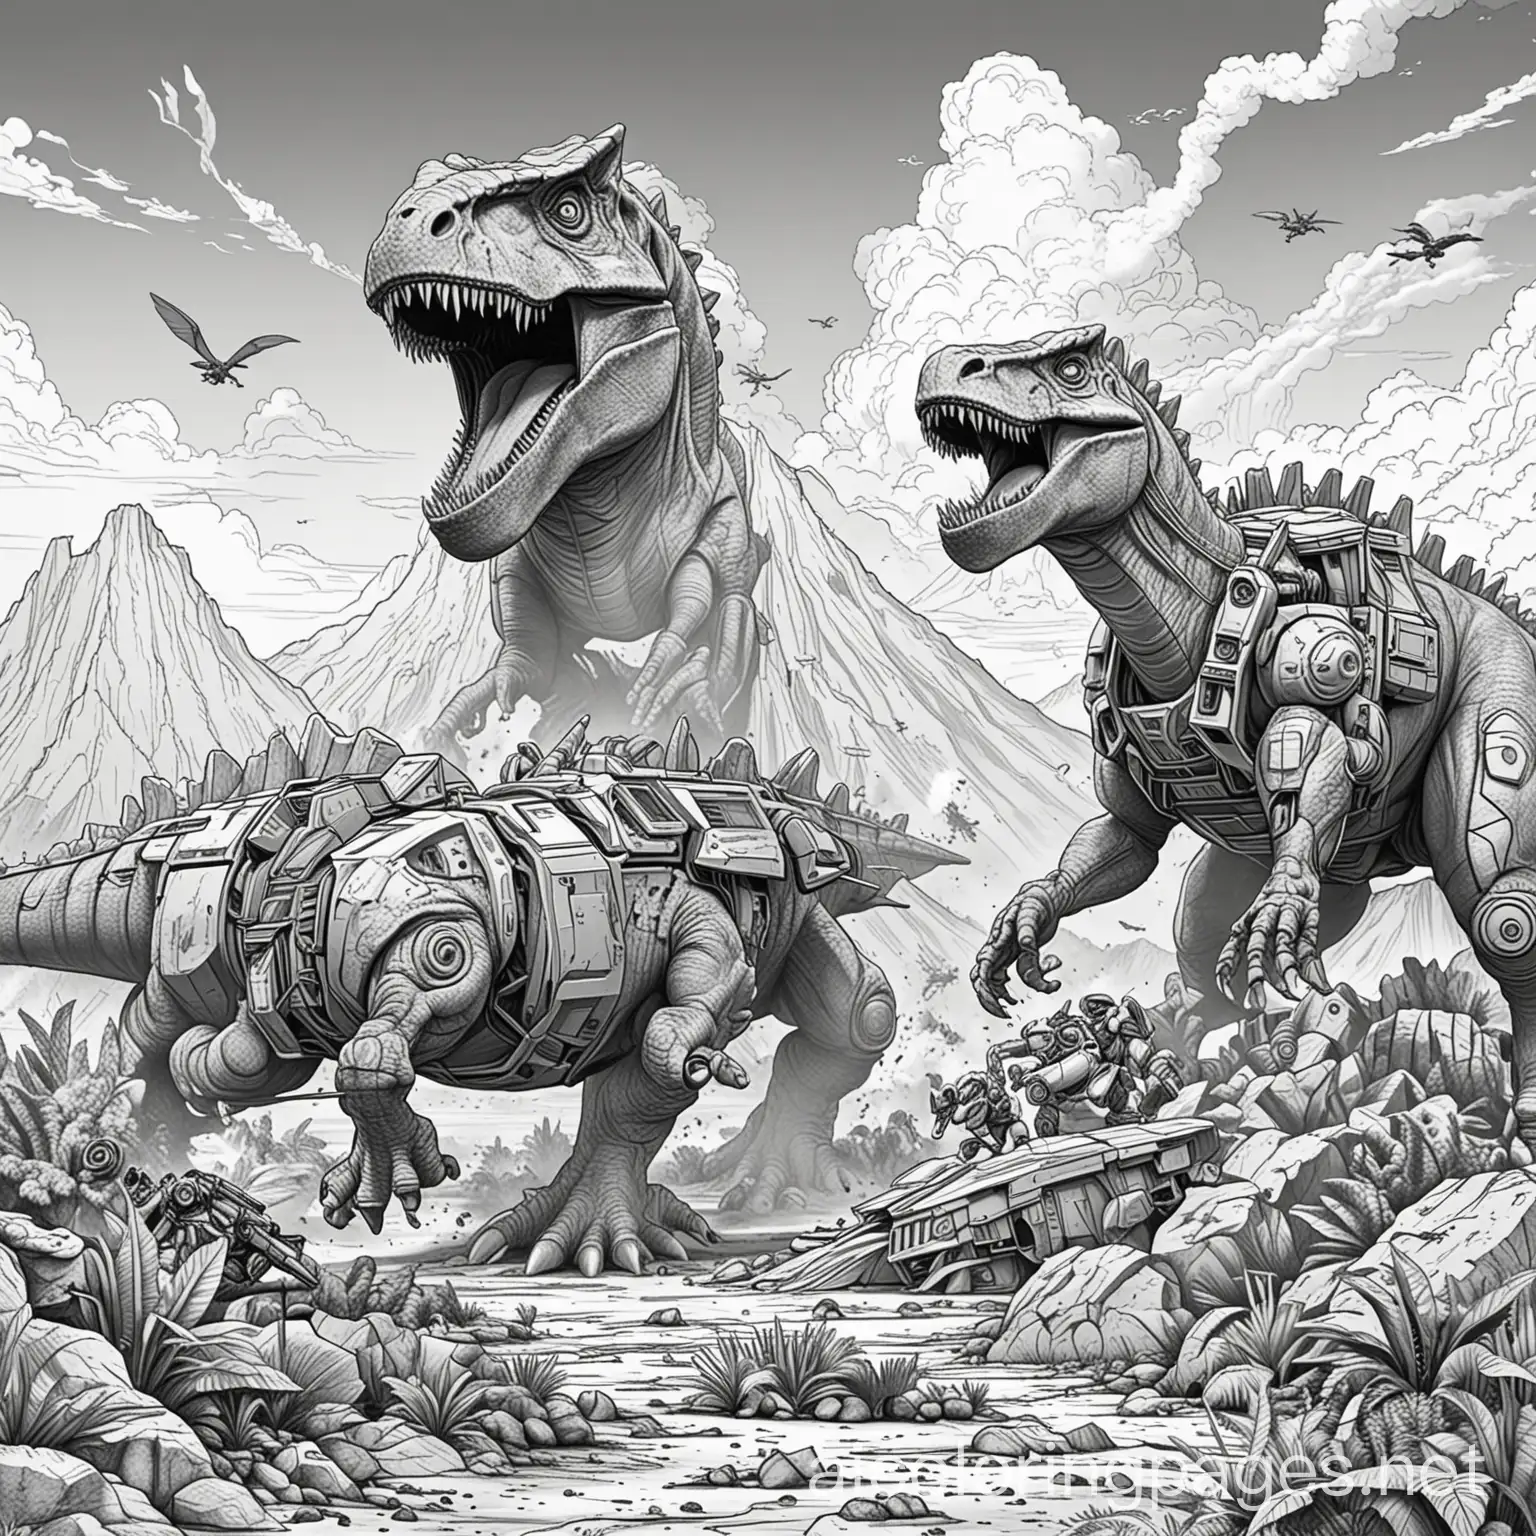 dinosaurs fighting transformers in a volcano, Coloring Page, black and white, line art, white background, Simplicity, Ample White Space. The background of the coloring page is plain white to make it easy for young children to color within the lines. The outlines of all the subjects are easy to distinguish, making it simple for kids to color without too much difficulty